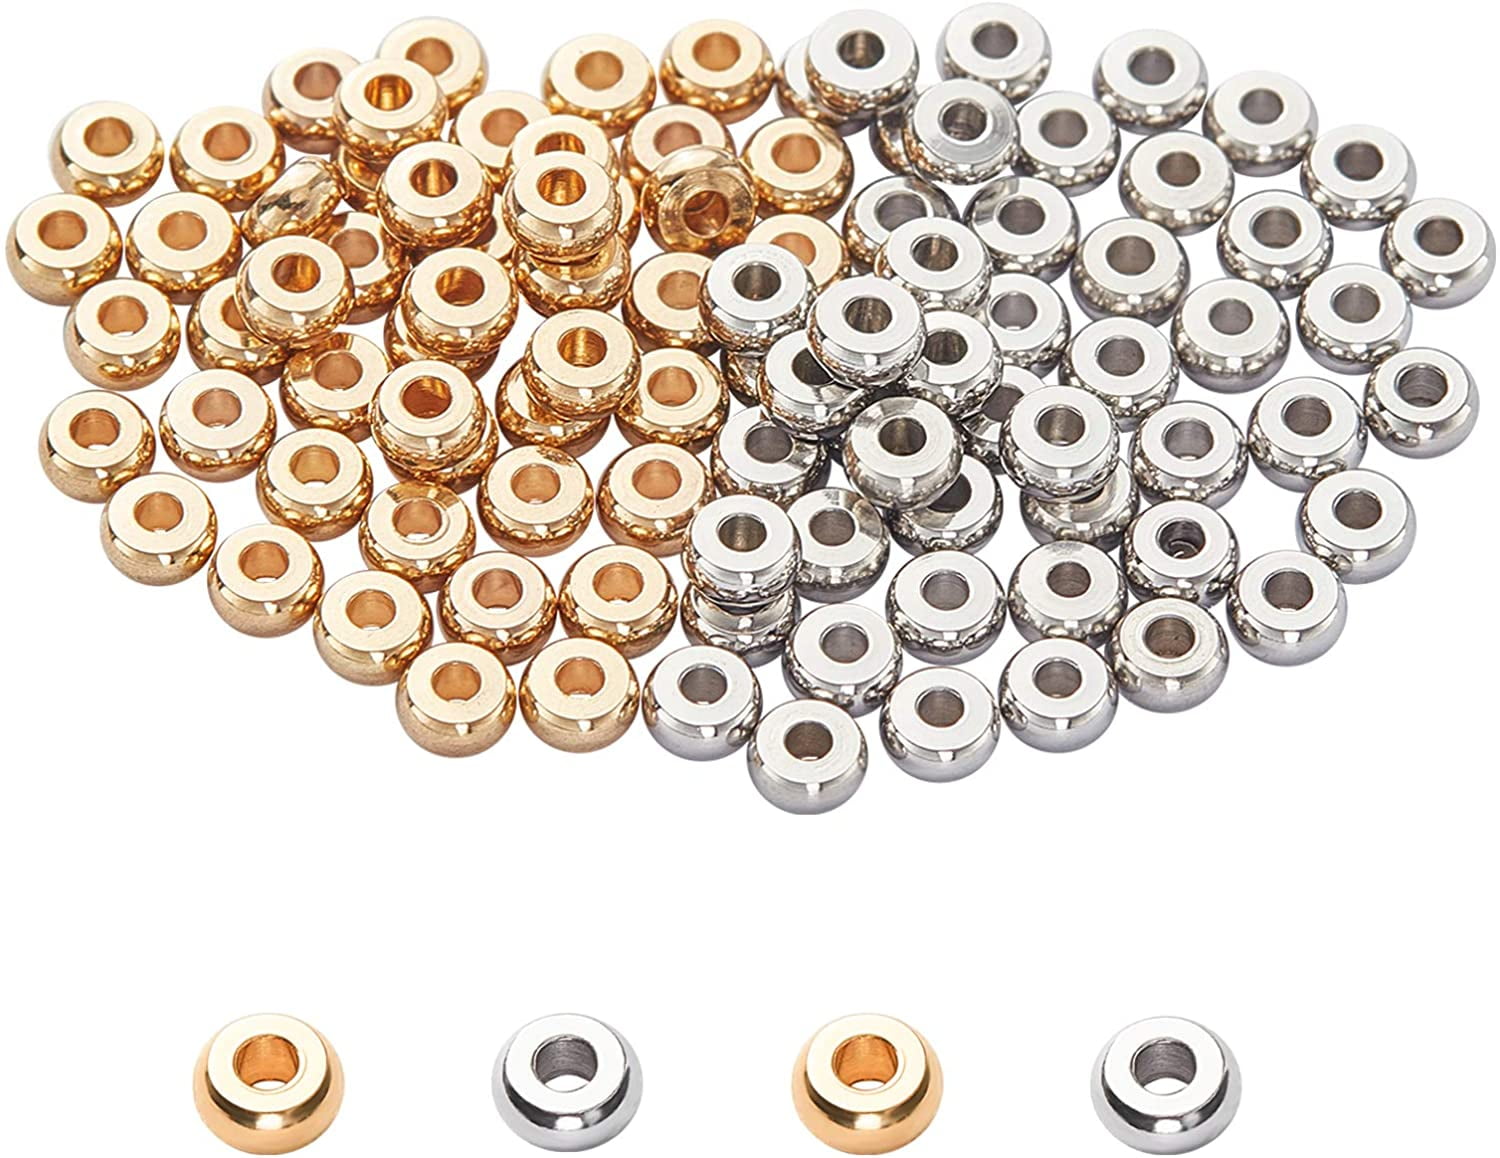 Metal Beads Spacer Beads 4mm Spacers Metal Spacer Bead Gold Spacers Antique  Gold Beads 100pcs 5600 